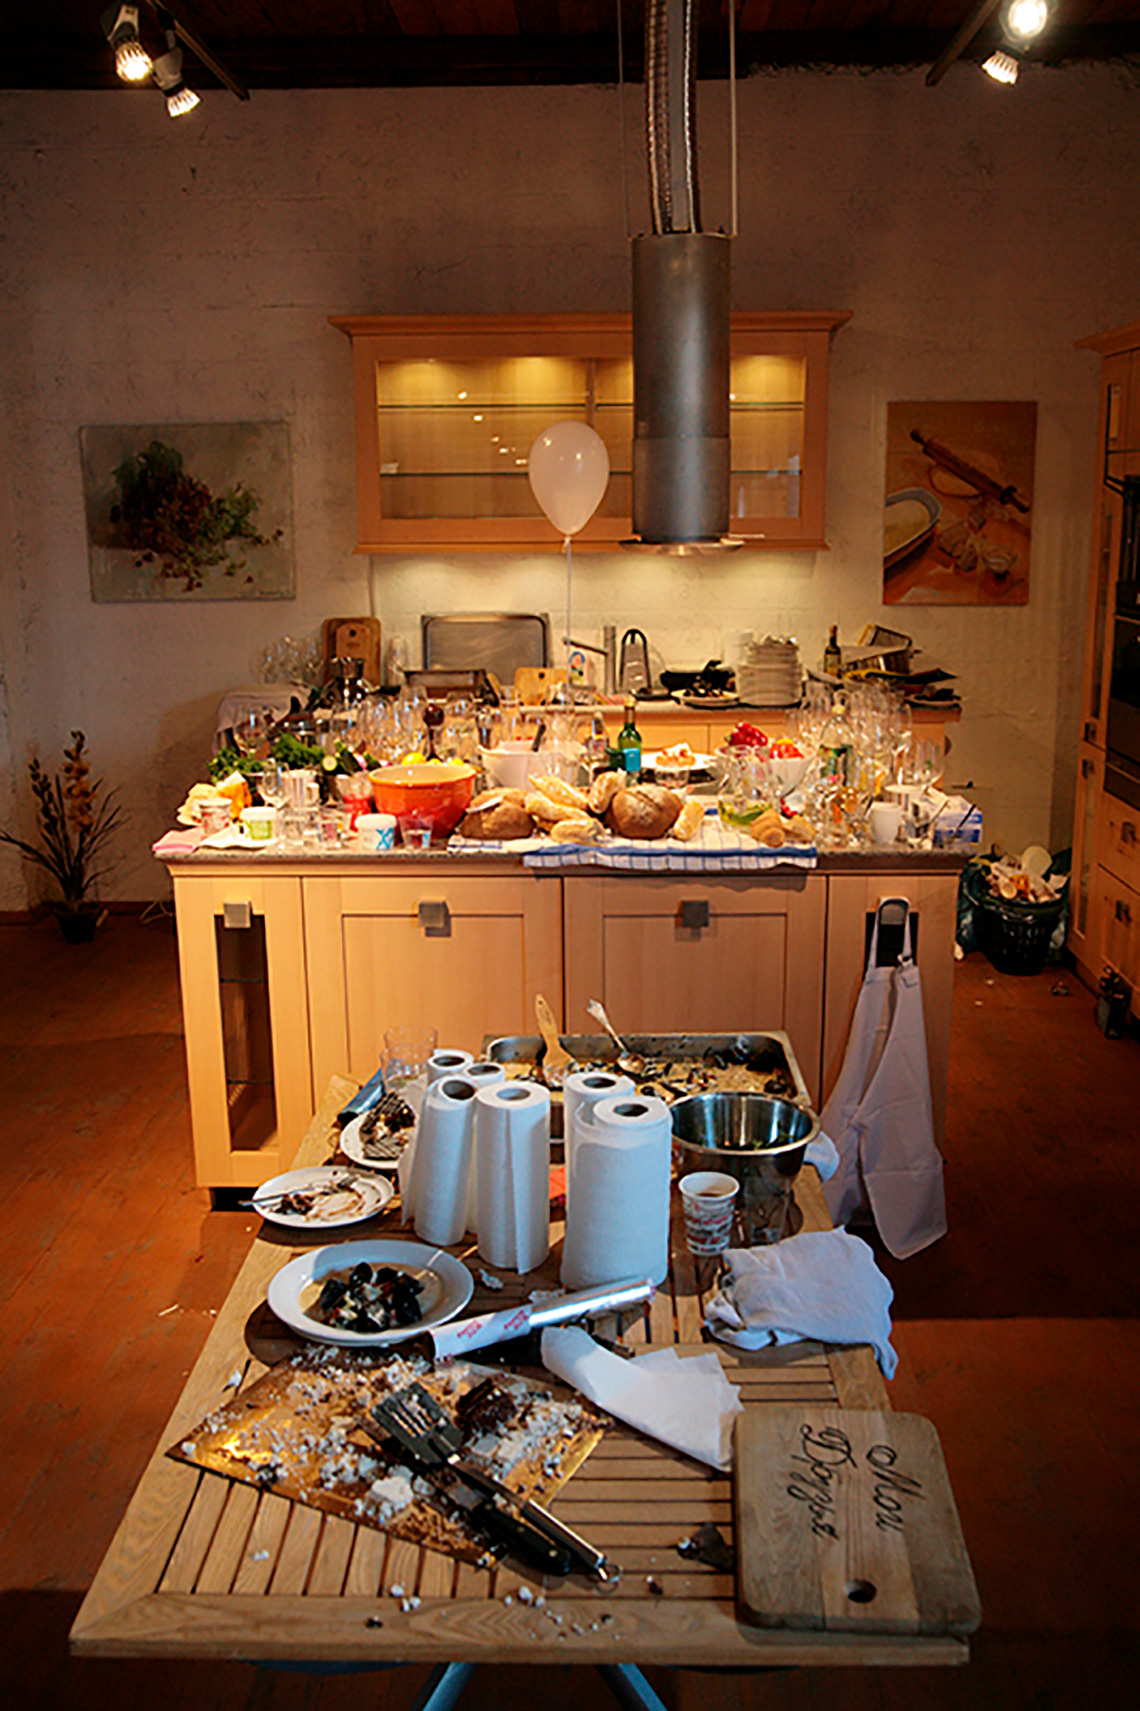 Kitchen after cooking. The birthday of “My Friends” cooking school. Cooking school in Ukraine.